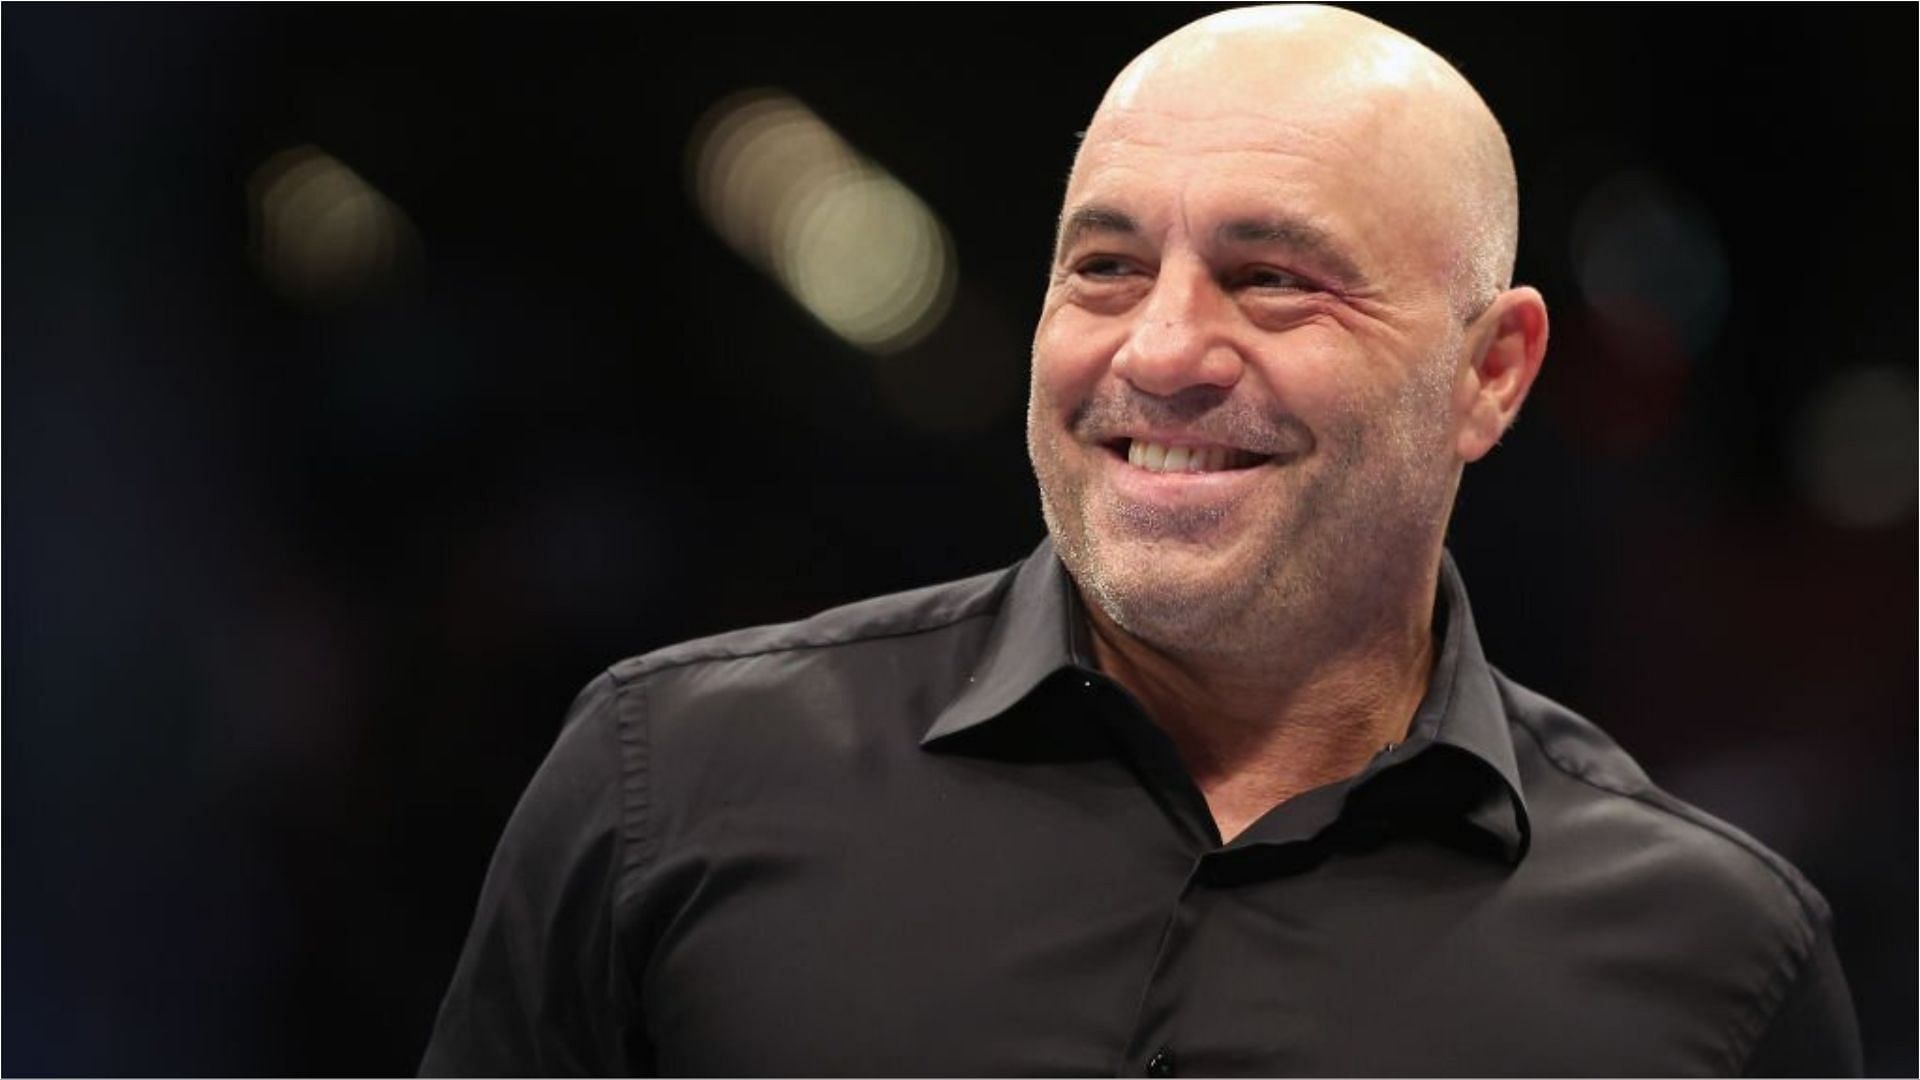 Joe Rogan spoke about Mad Honey in his podcast (Image via Christian Petersen/Getty Images)